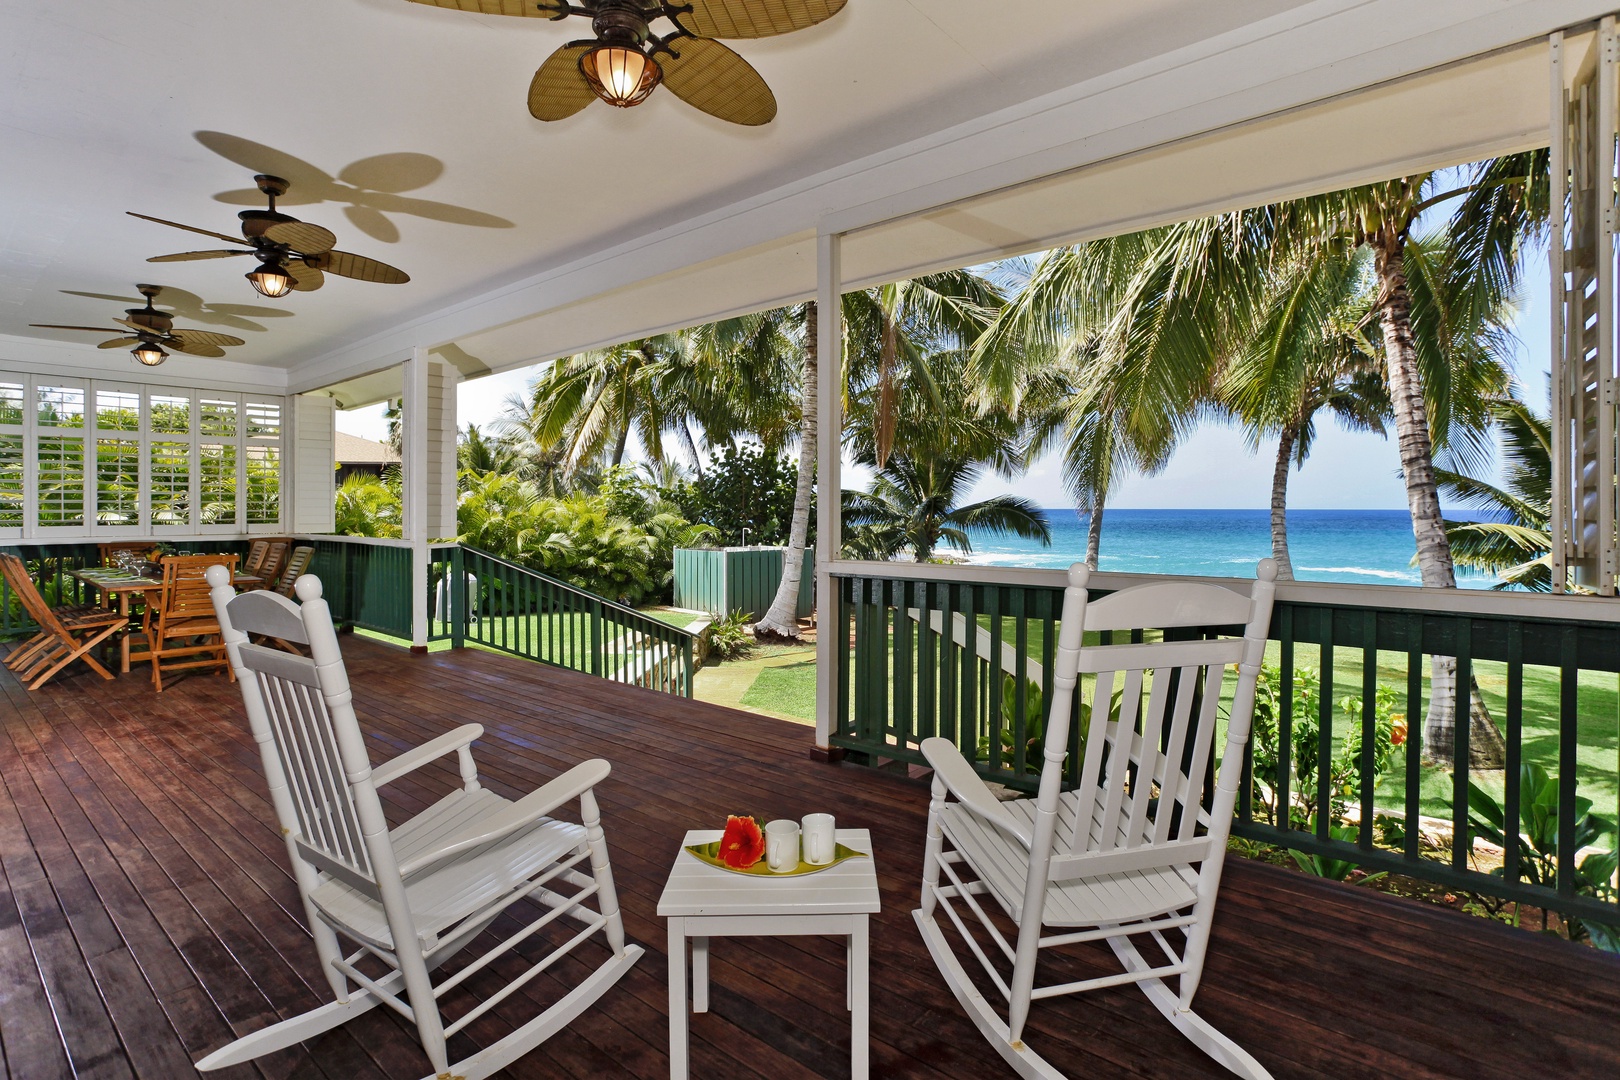 Waianae Vacation Rentals, Makaha Hale - Enjoy your oceanfront view from the covered lanai of the Makaha Hale.